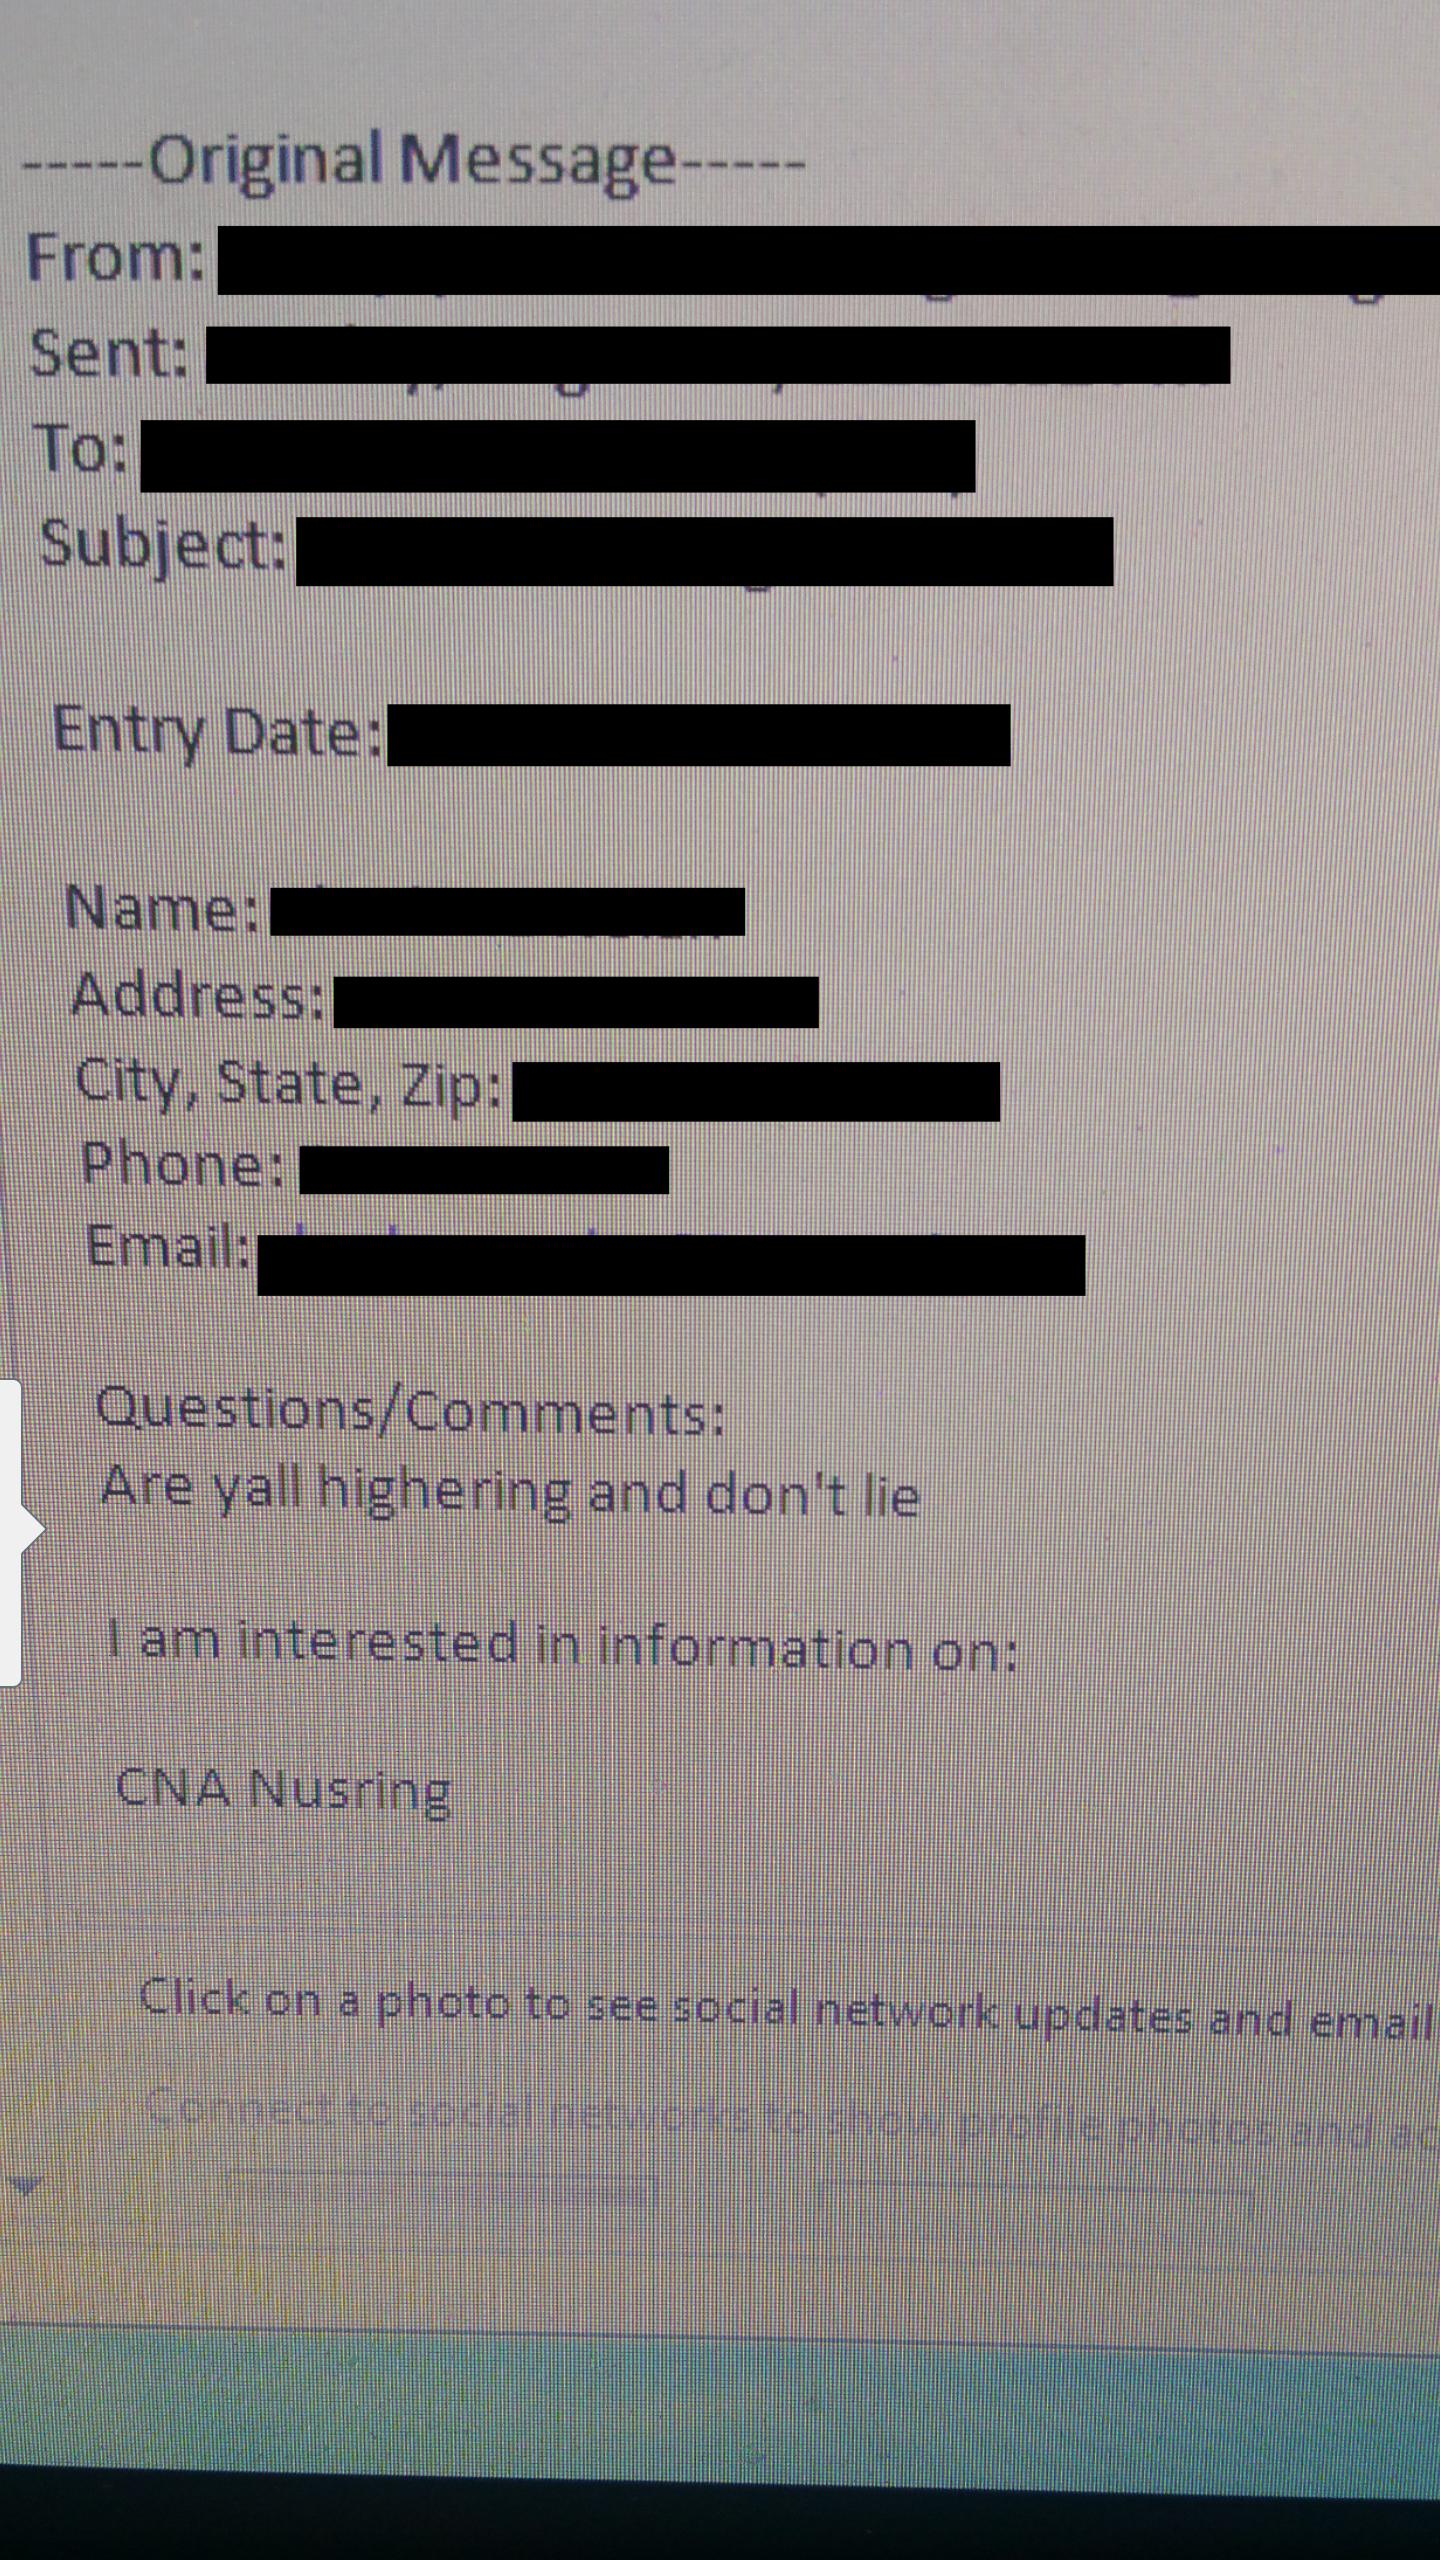 document - Original Message From Sent To Subject Entry Date Name Address City, State, Zip Phone Email Questions Are yall highering and don't lie Tam interested in Information on Cna Nusring Click on a photo to see social network updates and email